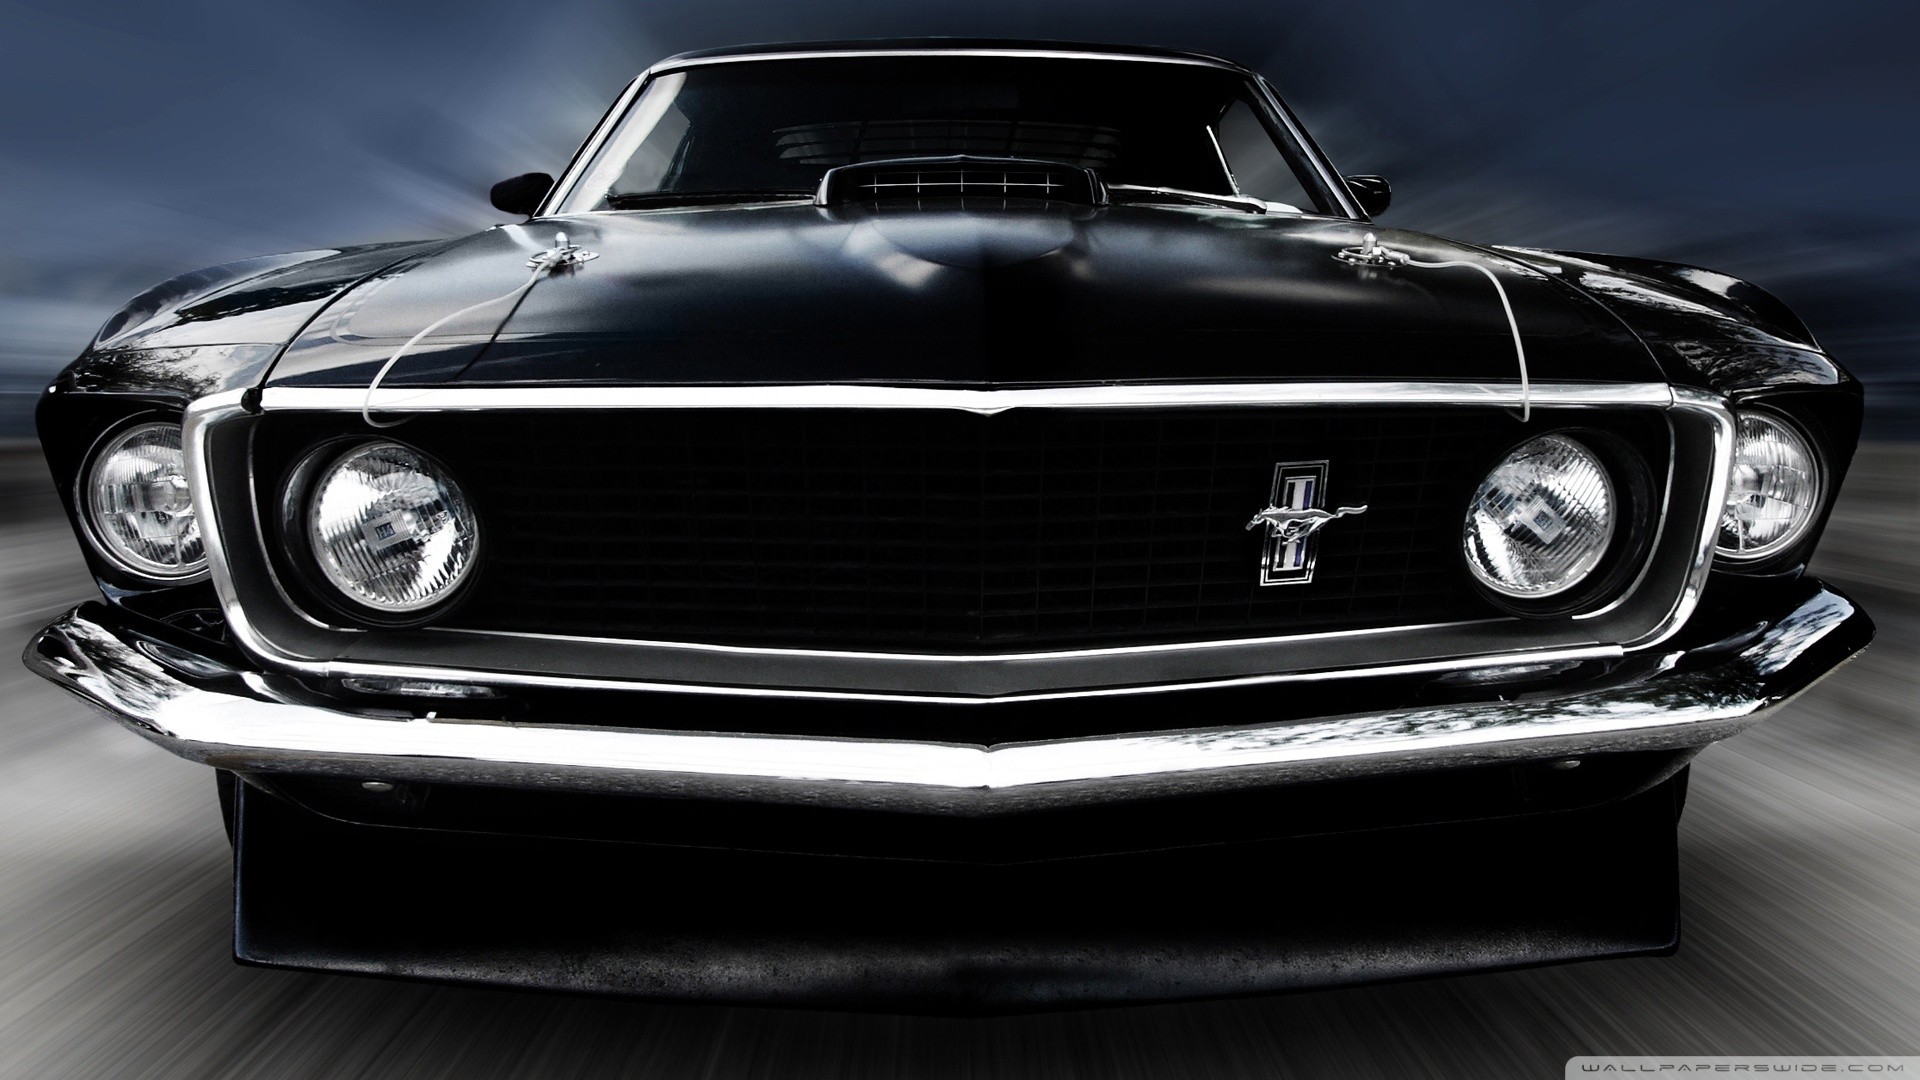 Muscle Cars Wallpaper 1920x1080 Muscle Cars Vehicles Ford Mustang